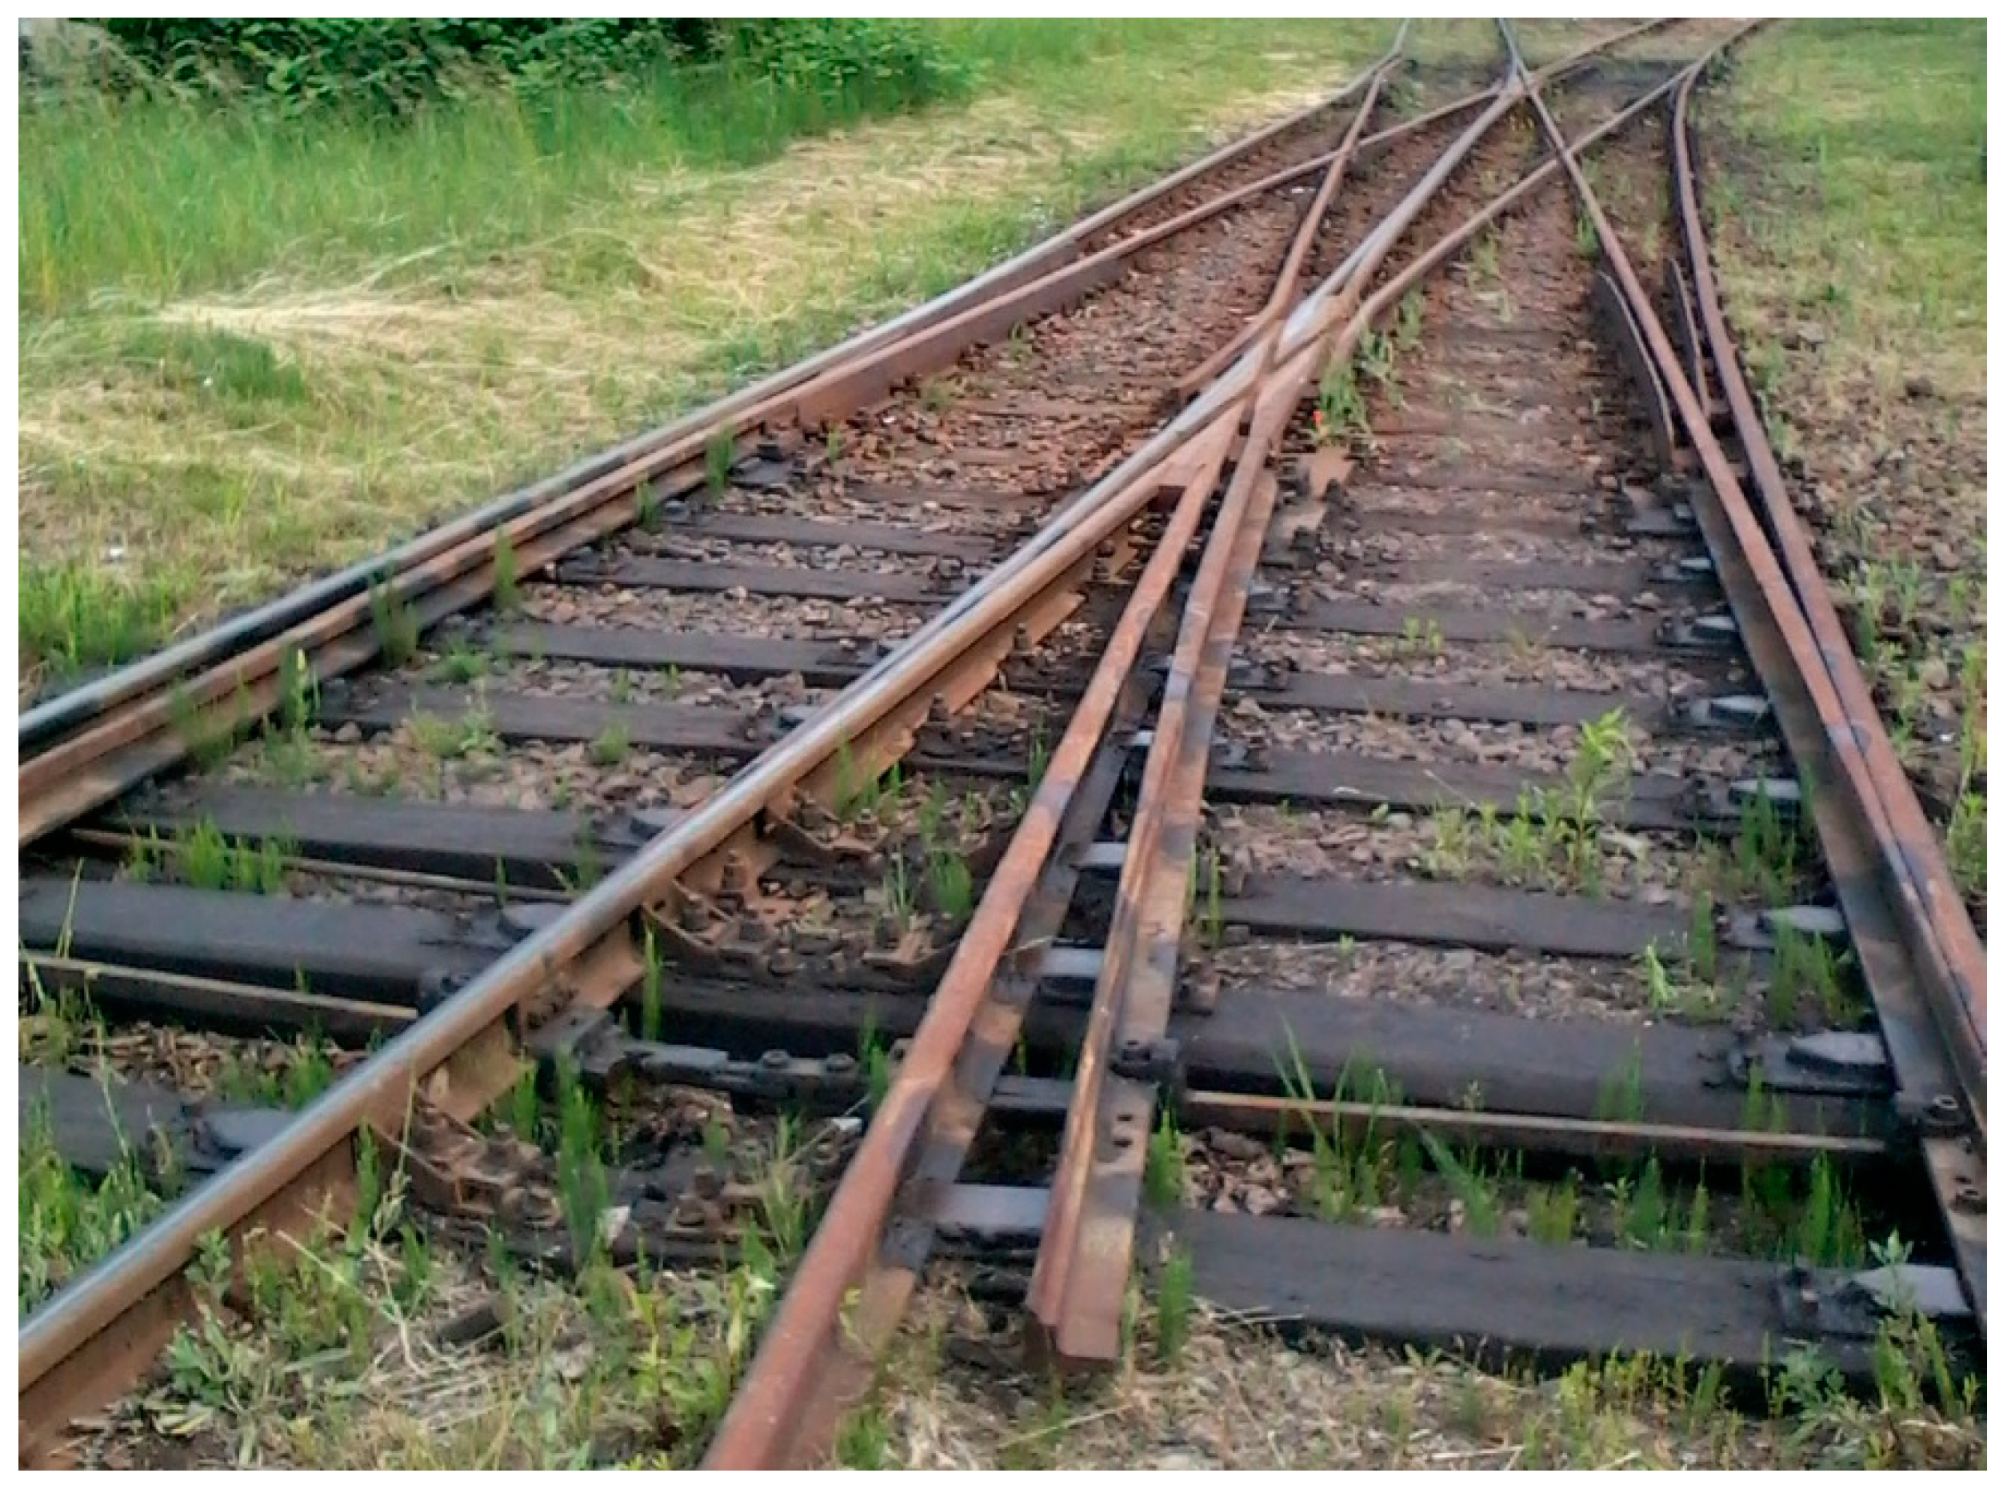 Sensors | Free Full-Text | Measurement of the Geometric Center of a Turnout  for the Safety of Railway Infrastructure Using MMS and Total Station | HTML